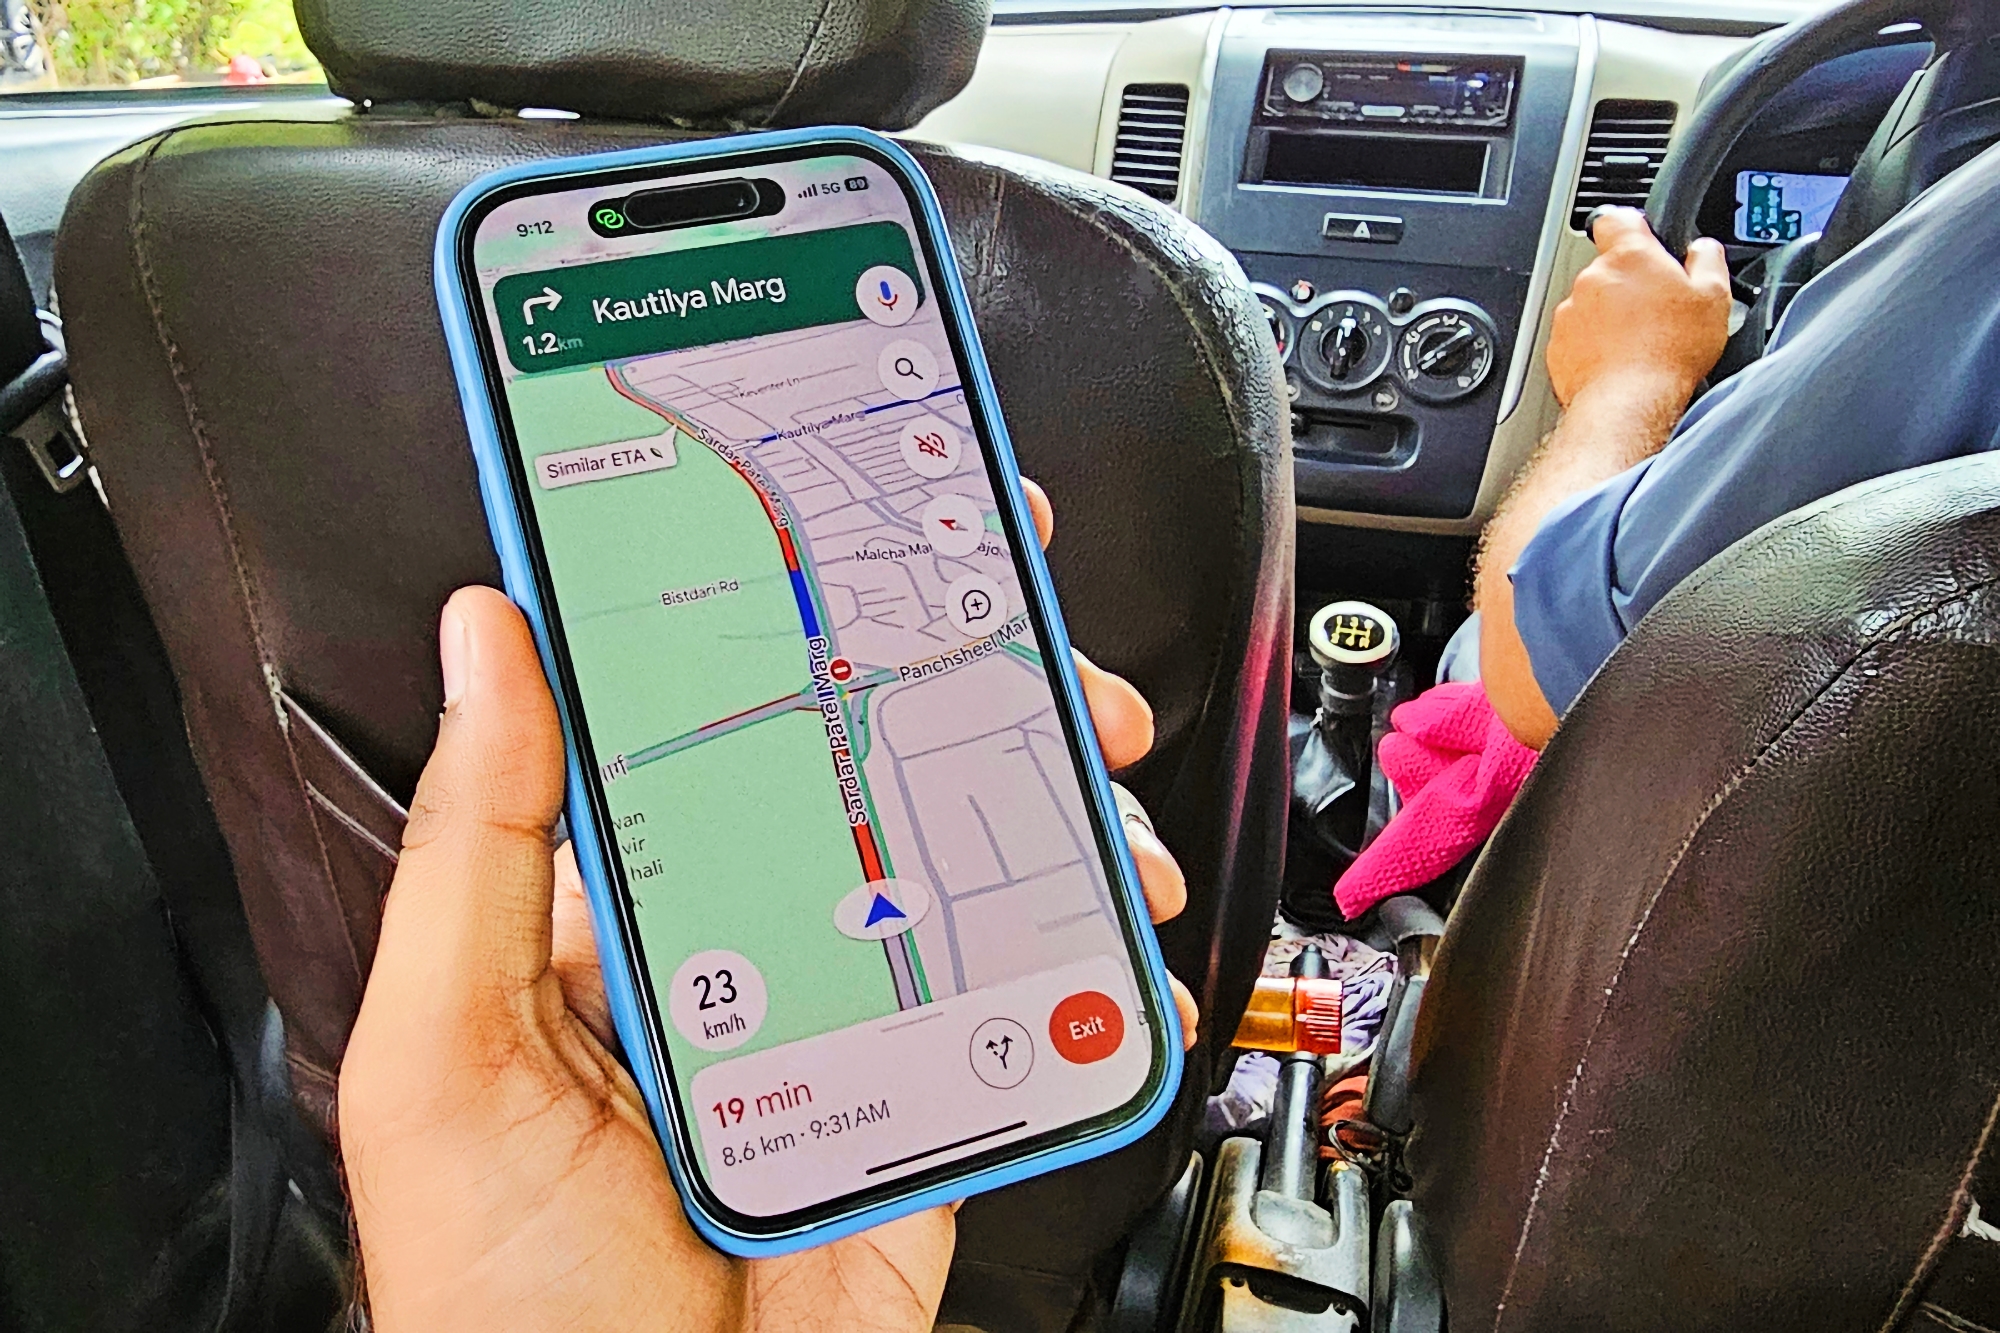 Google Maps has finally got speedometer and speed limit support for iOS and CarPlay